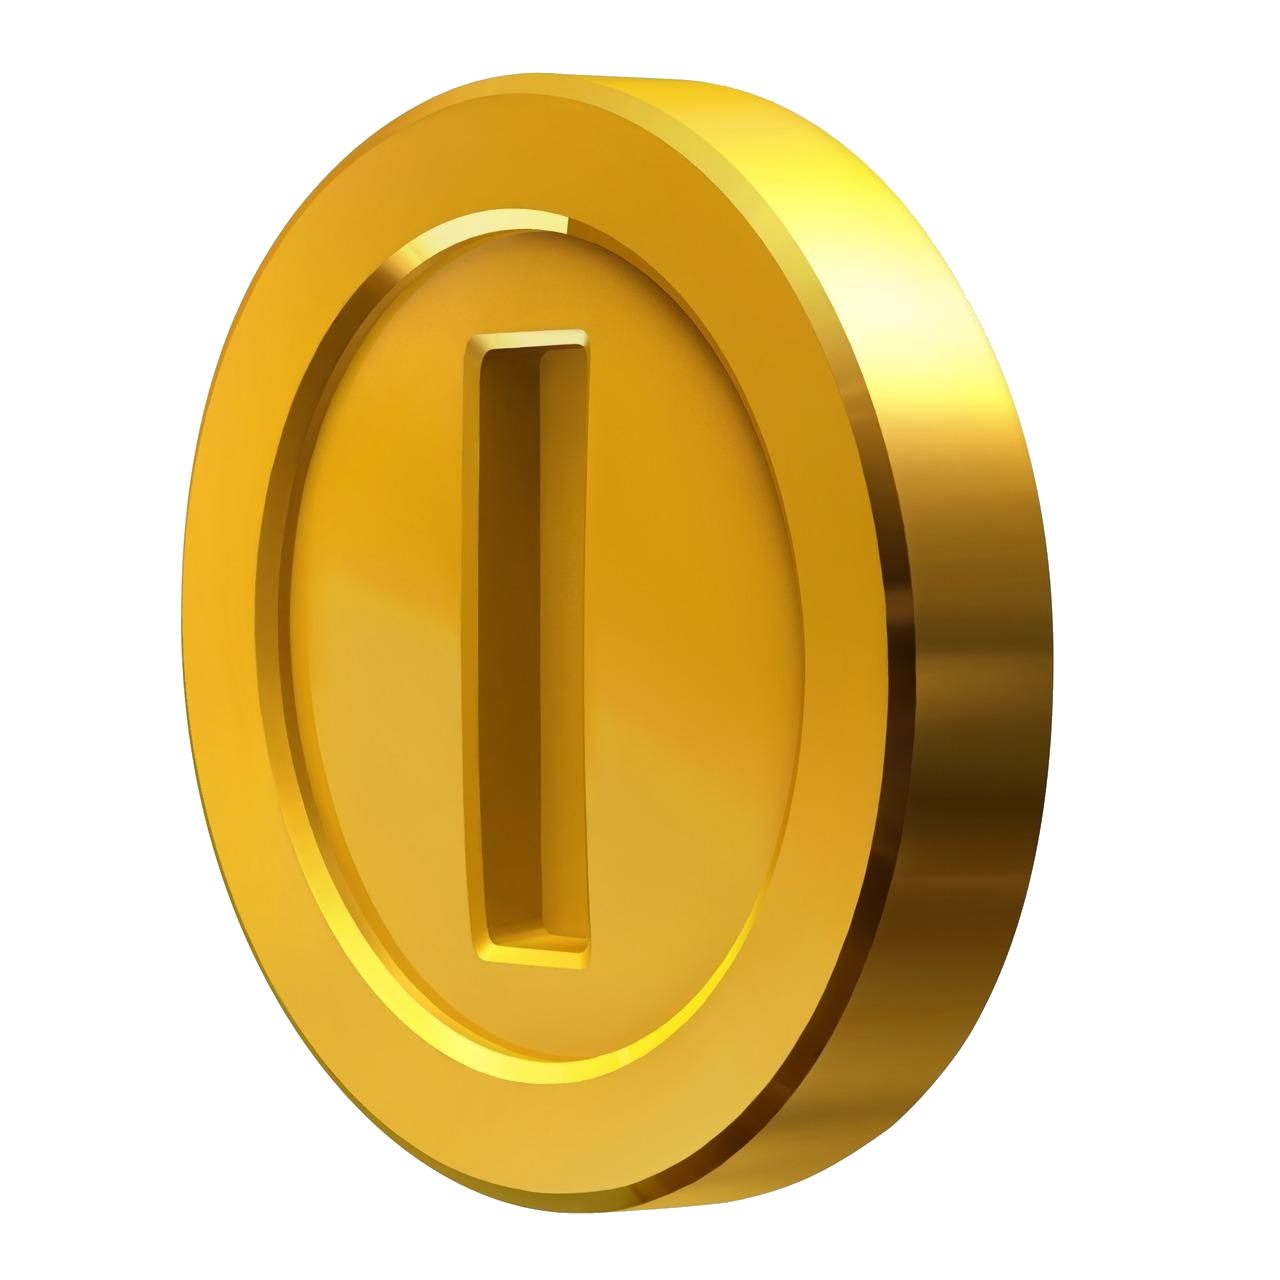 Game Gold Coin PNG HD Image